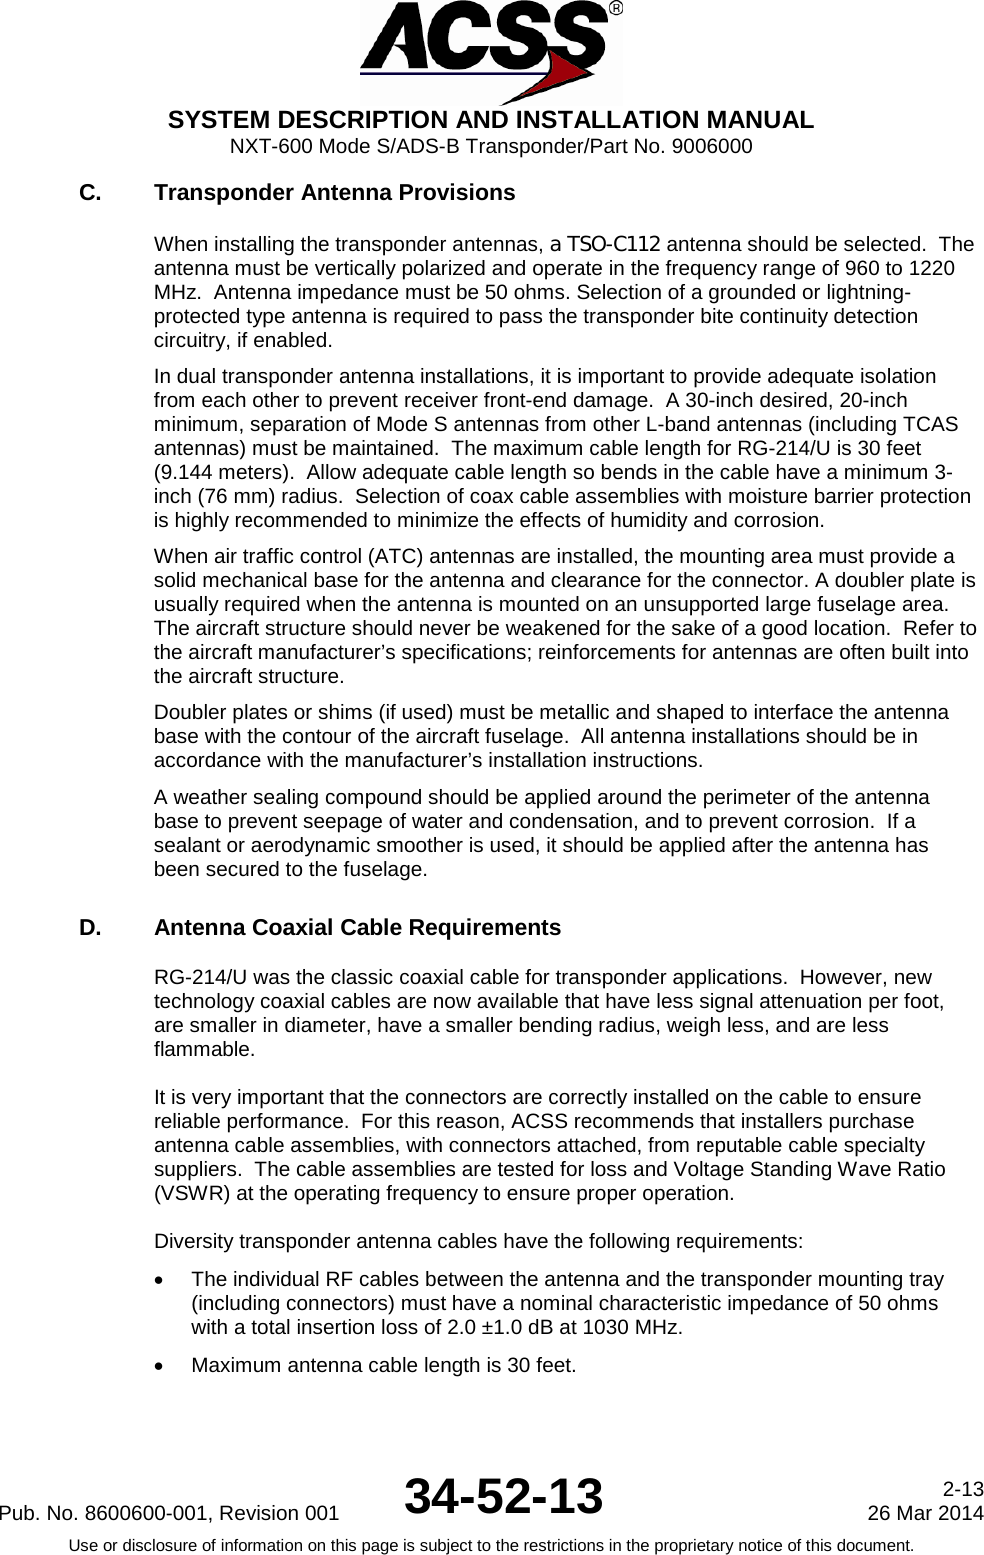  SYSTEM DESCRIPTION AND INSTALLATION MANUAL NXT-600 Mode S/ADS-B Transponder/Part No. 9006000 C. Transponder Antenna Provisions When installing the transponder antennas, a TSO-C112 antenna should be selected.  The antenna must be vertically polarized and operate in the frequency range of 960 to 1220 MHz.  Antenna impedance must be 50 ohms. Selection of a grounded or lightning-protected type antenna is required to pass the transponder bite continuity detection circuitry, if enabled. In dual transponder antenna installations, it is important to provide adequate isolation from each other to prevent receiver front-end damage.  A 30-inch desired, 20-inch minimum, separation of Mode S antennas from other L-band antennas (including TCAS antennas) must be maintained.  The maximum cable length for RG-214/U is 30 feet (9.144 meters).  Allow adequate cable length so bends in the cable have a minimum 3-inch (76 mm) radius.  Selection of coax cable assemblies with moisture barrier protection is highly recommended to minimize the effects of humidity and corrosion. When air traffic control (ATC) antennas are installed, the mounting area must provide a solid mechanical base for the antenna and clearance for the connector. A doubler plate is usually required when the antenna is mounted on an unsupported large fuselage area.  The aircraft structure should never be weakened for the sake of a good location.  Refer to the aircraft manufacturer’s specifications; reinforcements for antennas are often built into the aircraft structure. Doubler plates or shims (if used) must be metallic and shaped to interface the antenna base with the contour of the aircraft fuselage.  All antenna installations should be in accordance with the manufacturer’s installation instructions. A weather sealing compound should be applied around the perimeter of the antenna base to prevent seepage of water and condensation, and to prevent corrosion.  If a sealant or aerodynamic smoother is used, it should be applied after the antenna has been secured to the fuselage. D. Antenna Coaxial Cable Requirements RG-214/U was the classic coaxial cable for transponder applications.  However, new technology coaxial cables are now available that have less signal attenuation per foot, are smaller in diameter, have a smaller bending radius, weigh less, and are less flammable.  It is very important that the connectors are correctly installed on the cable to ensure reliable performance.  For this reason, ACSS recommends that installers purchase antenna cable assemblies, with connectors attached, from reputable cable specialty suppliers.  The cable assemblies are tested for loss and Voltage Standing Wave Ratio (VSWR) at the operating frequency to ensure proper operation.  Diversity transponder antenna cables have the following requirements: • The individual RF cables between the antenna and the transponder mounting tray (including connectors) must have a nominal characteristic impedance of 50 ohms with a total insertion loss of 2.0 ±1.0 dB at 1030 MHz. • Maximum antenna cable length is 30 feet. Pub. No. 8600600-001, Revision 001 34-52-13 2-13 26 Mar 2014 Use or disclosure of information on this page is subject to the restrictions in the proprietary notice of this document.     